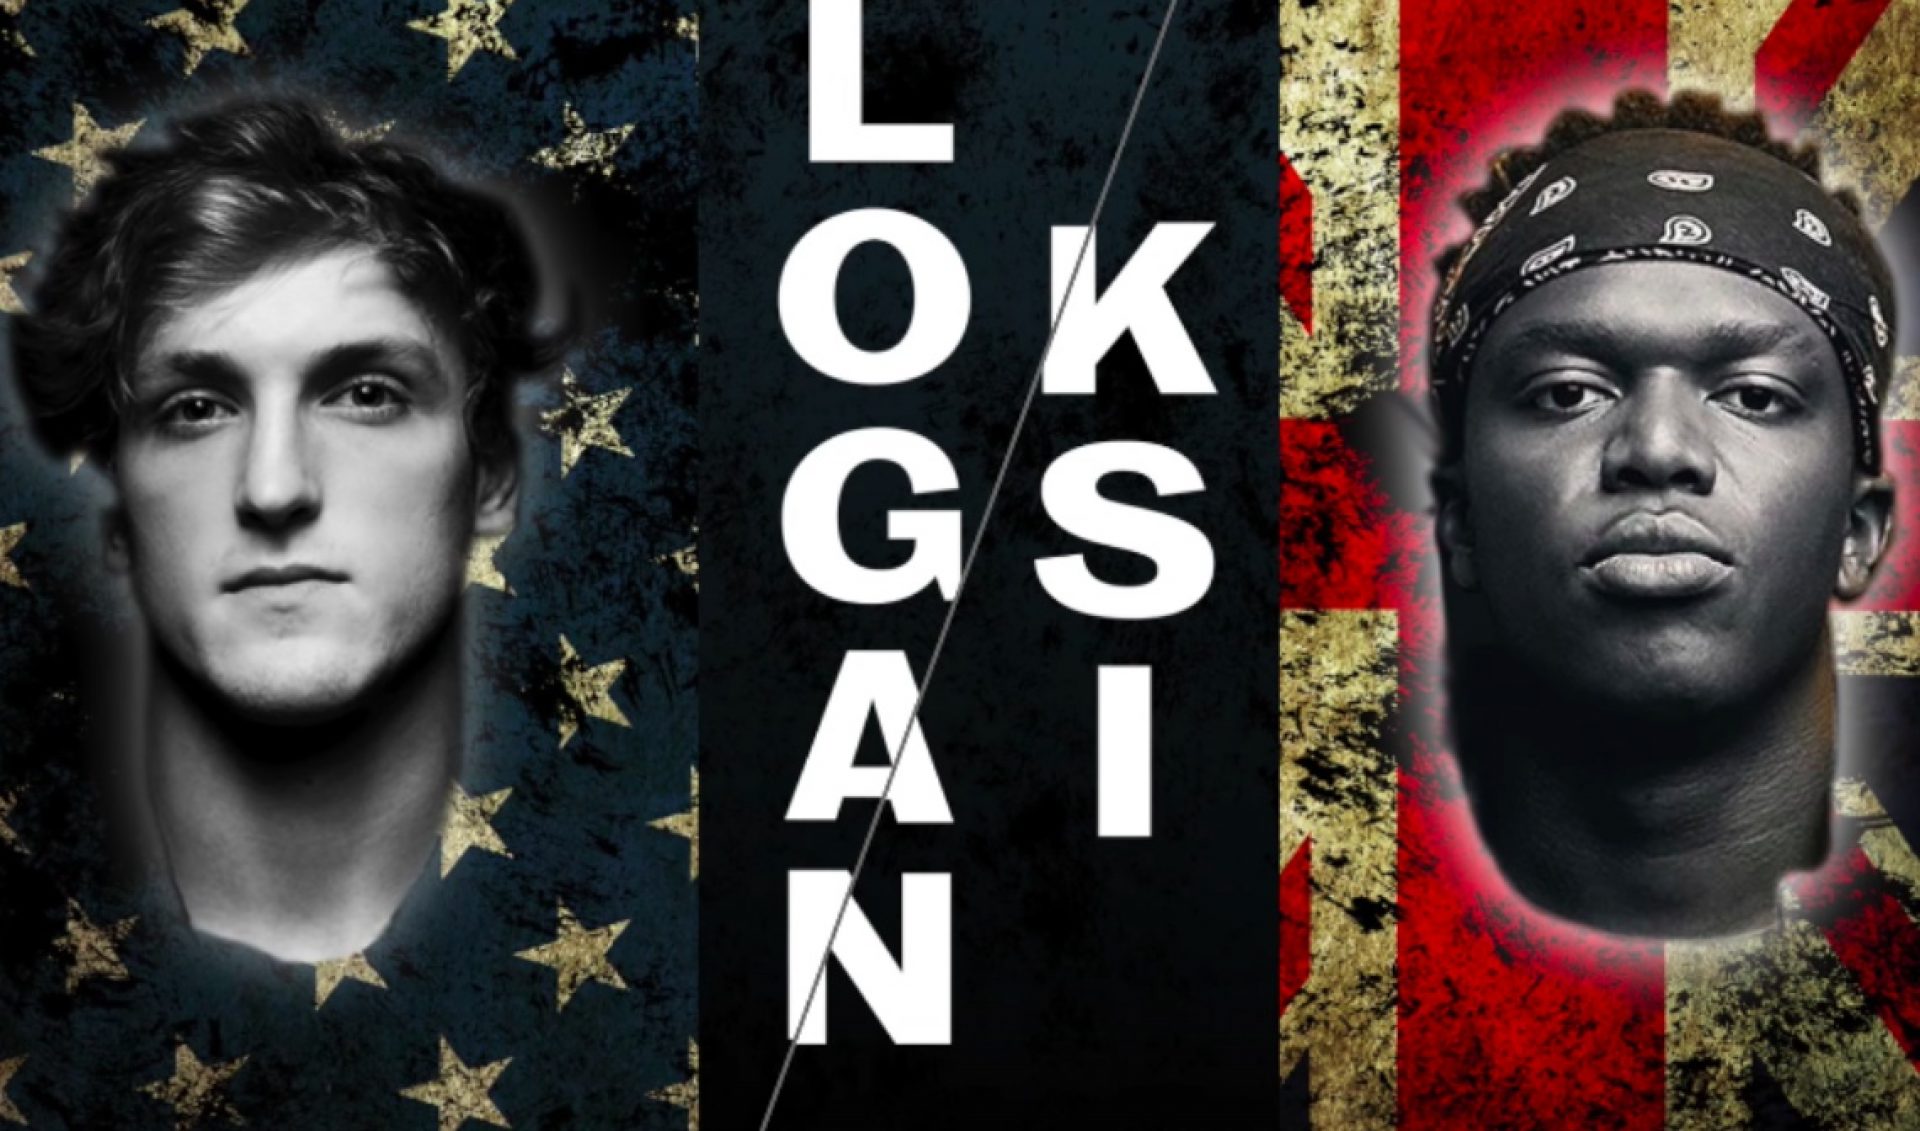 Logan Paul And KSI Are Probably Going To Box And It’s Going To Be The Biggest Thing Ever On YouTube